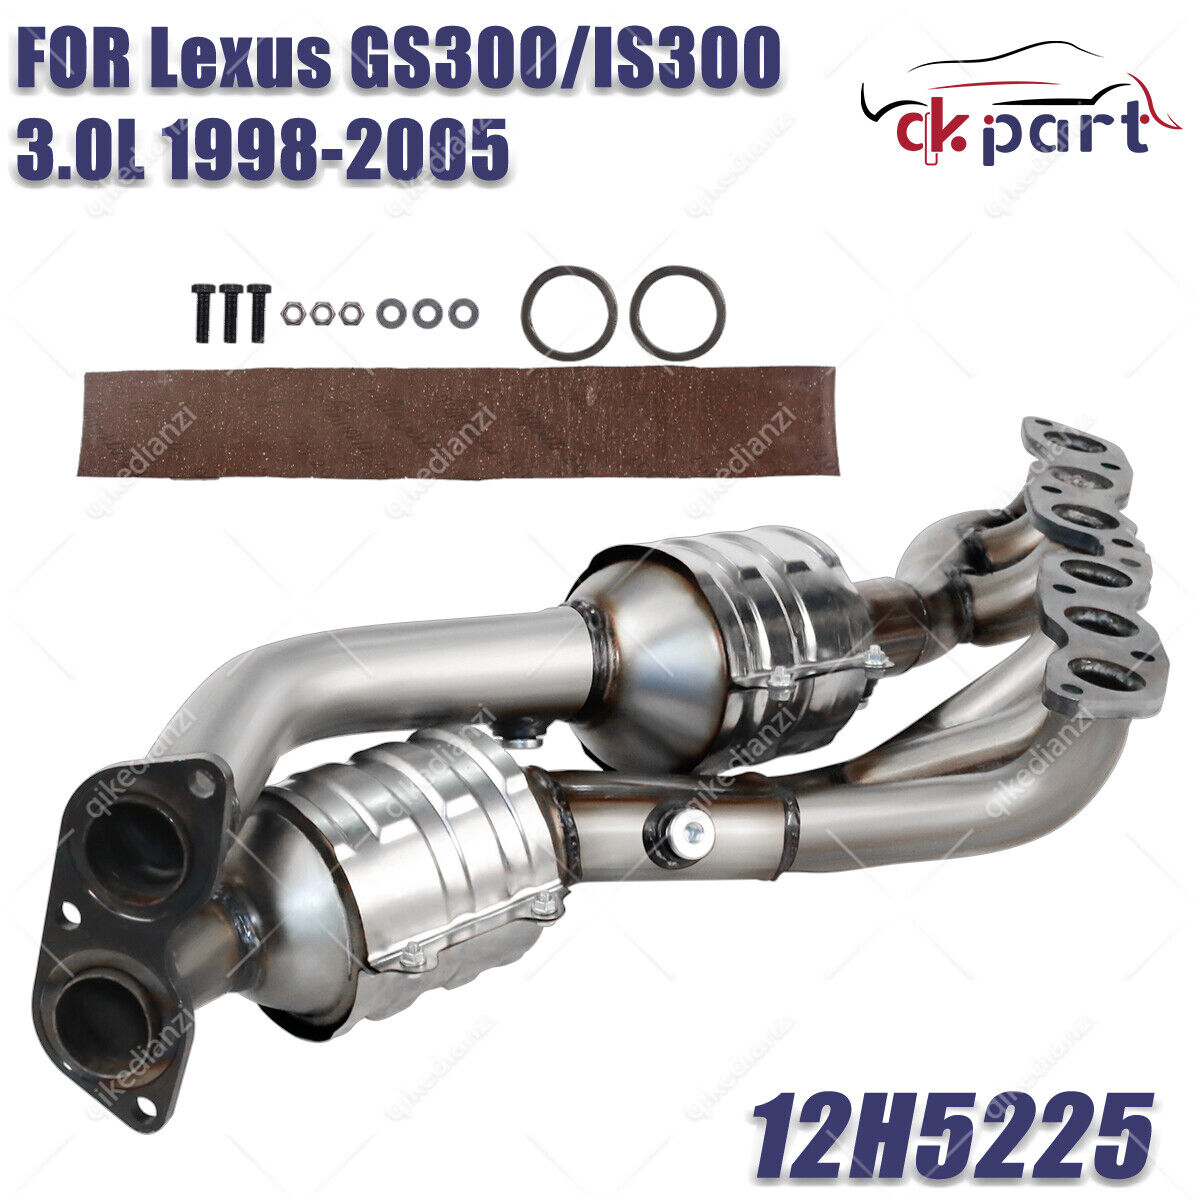 For Lexus GS300 3.0L Dual Manifold Catalytic Converters 1998-2005 OBDII 12H5225